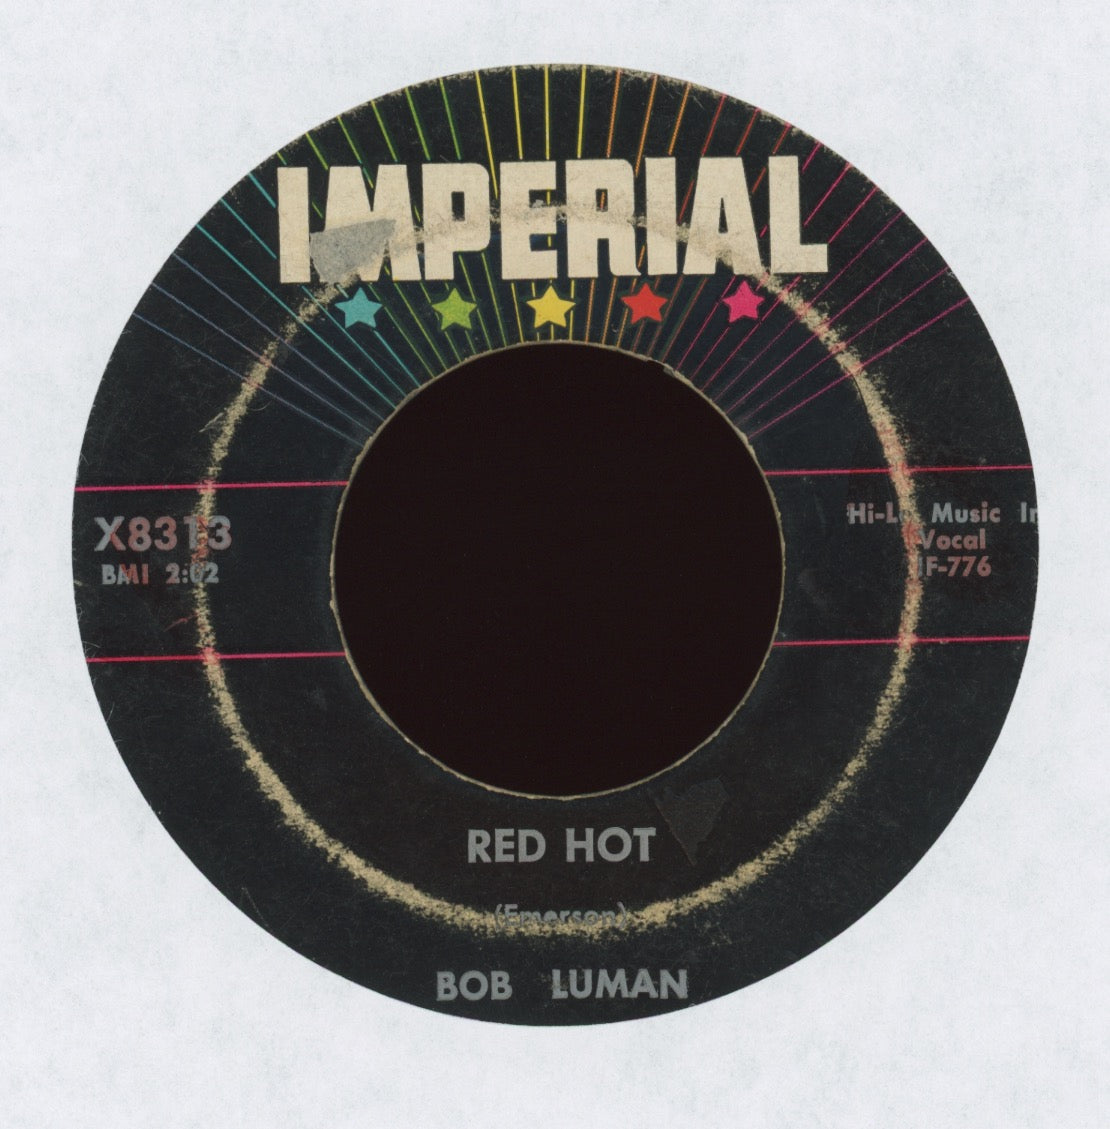 Bob Luman - Red Hot on Imperial